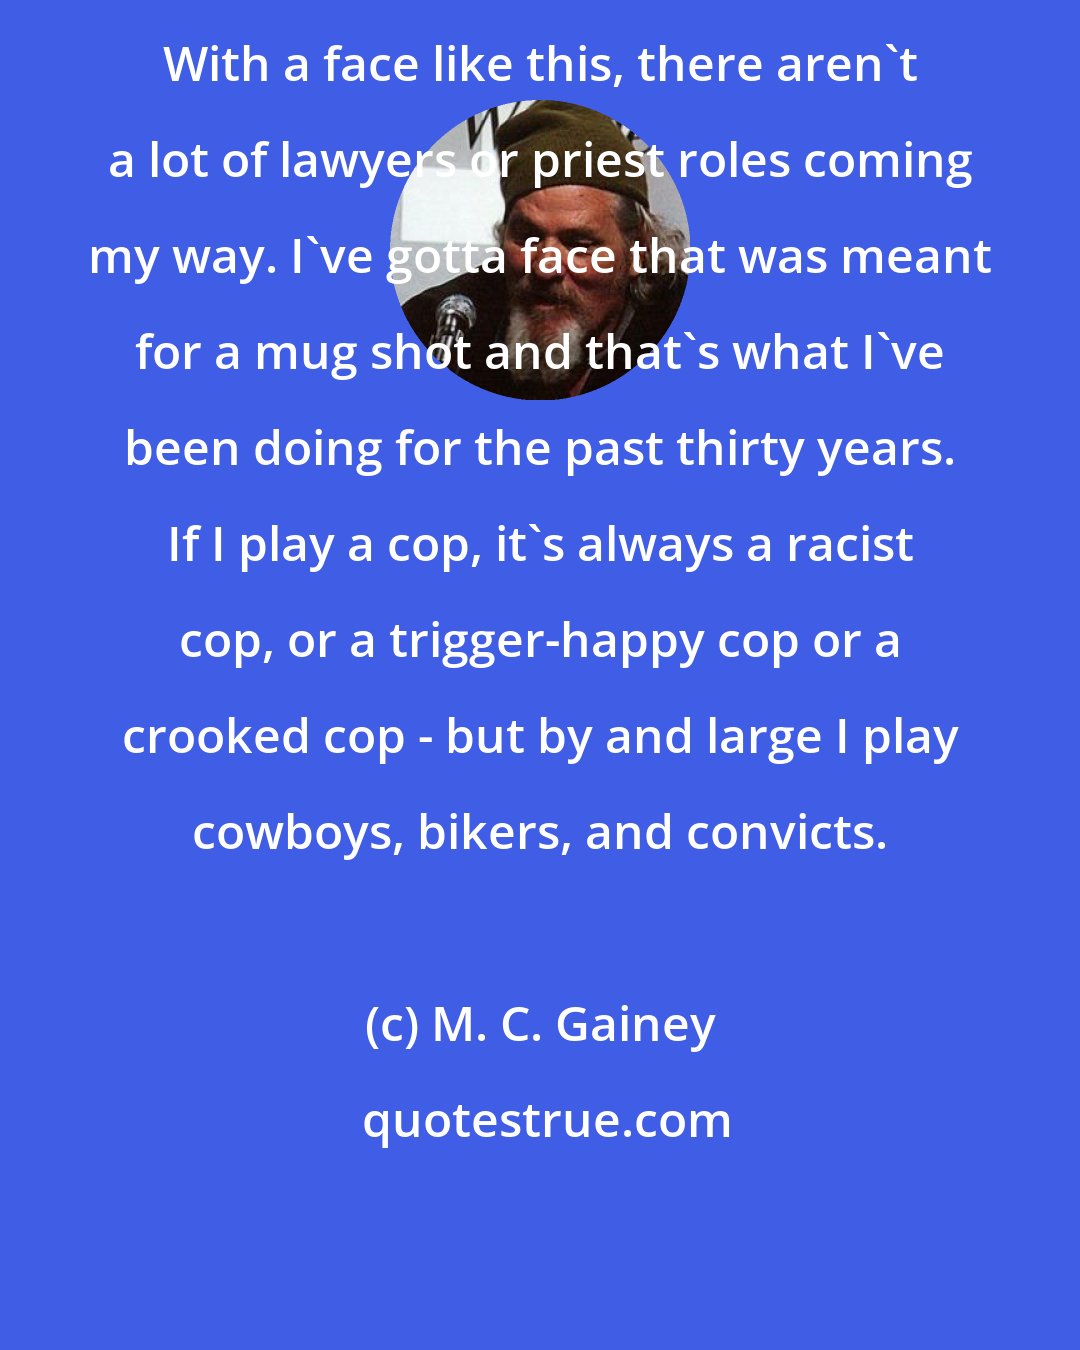 M. C. Gainey: With a face like this, there aren't a lot of lawyers or priest roles coming my way. I've gotta face that was meant for a mug shot and that's what I've been doing for the past thirty years. If I play a cop, it's always a racist cop, or a trigger-happy cop or a crooked cop - but by and large I play cowboys, bikers, and convicts.